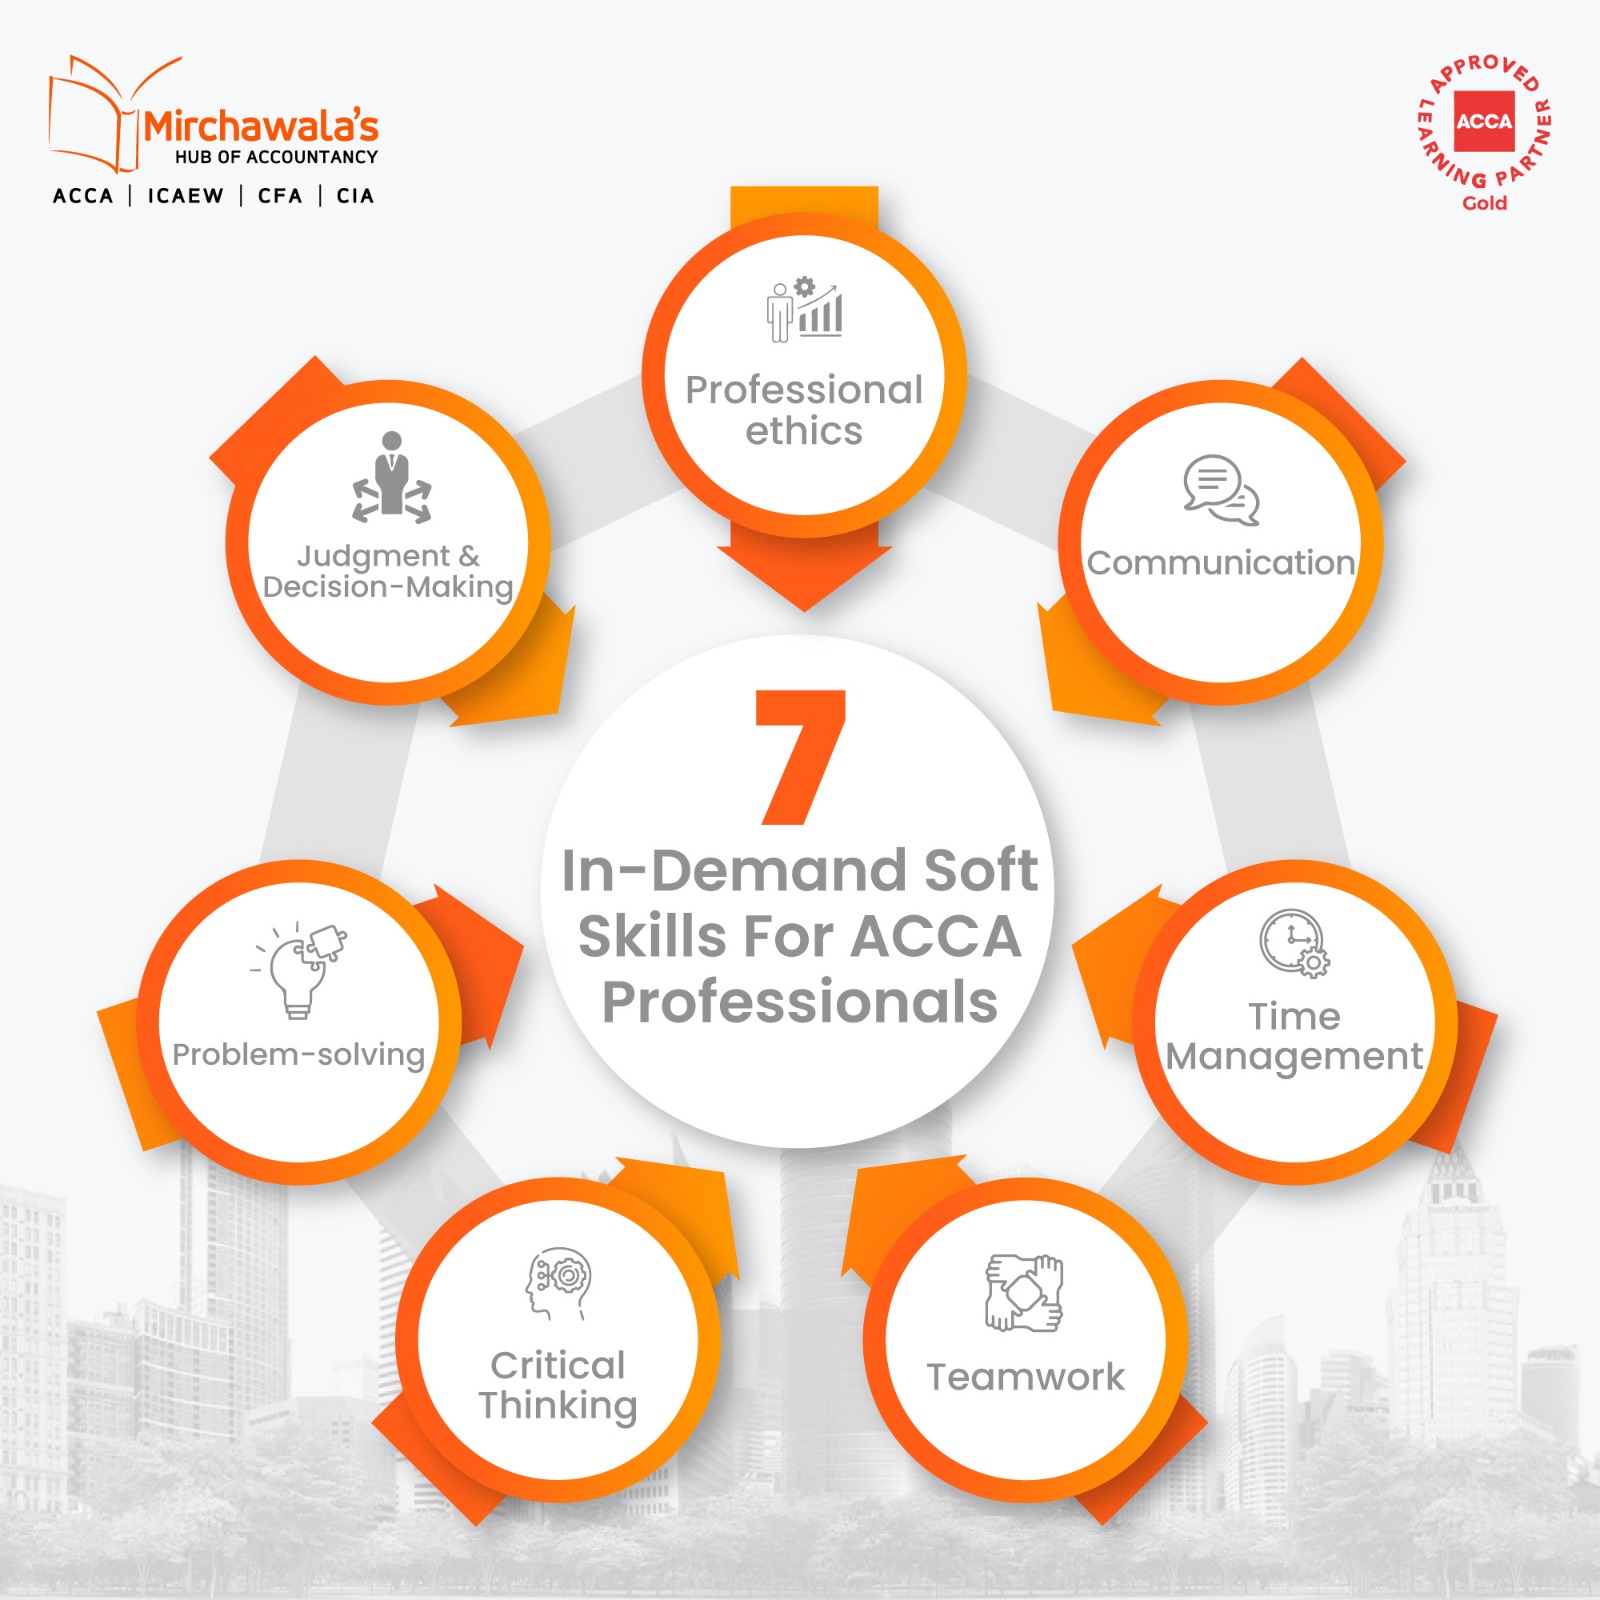 7 In-demand Soft Skills for ACCA Professionals: Here is the List!